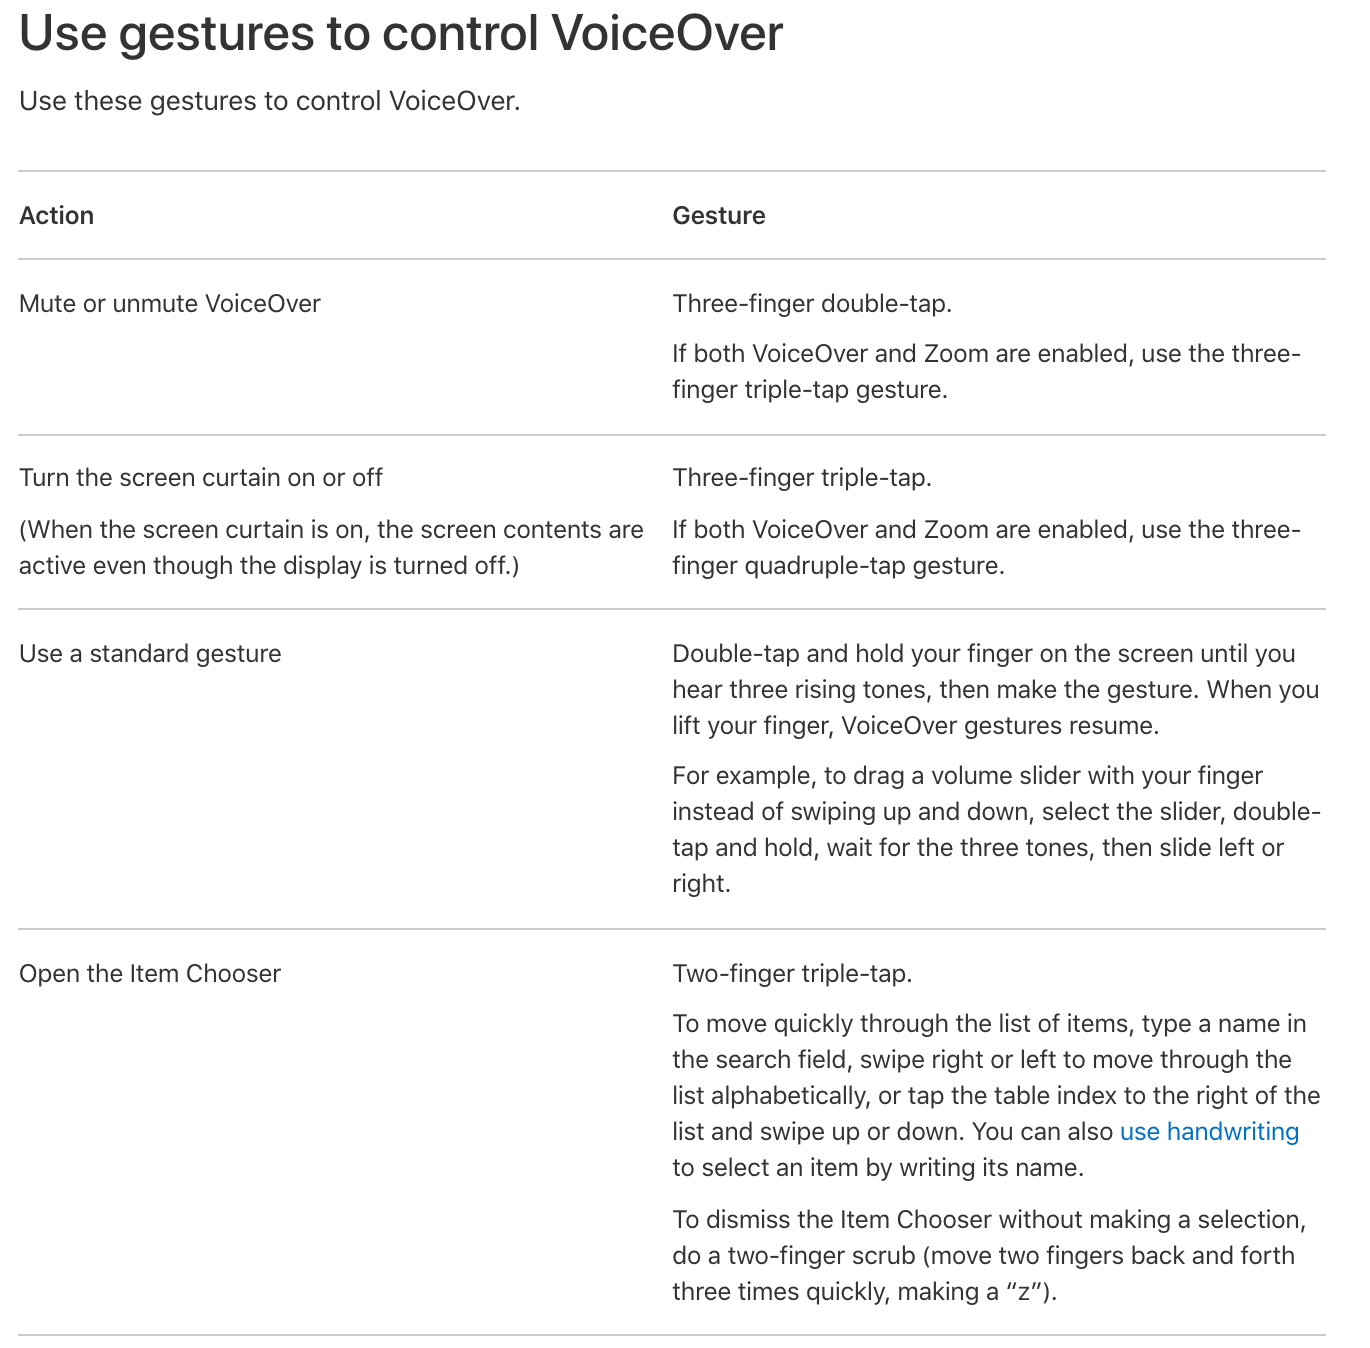 An image showing how you can control VoiceOver using gestures.